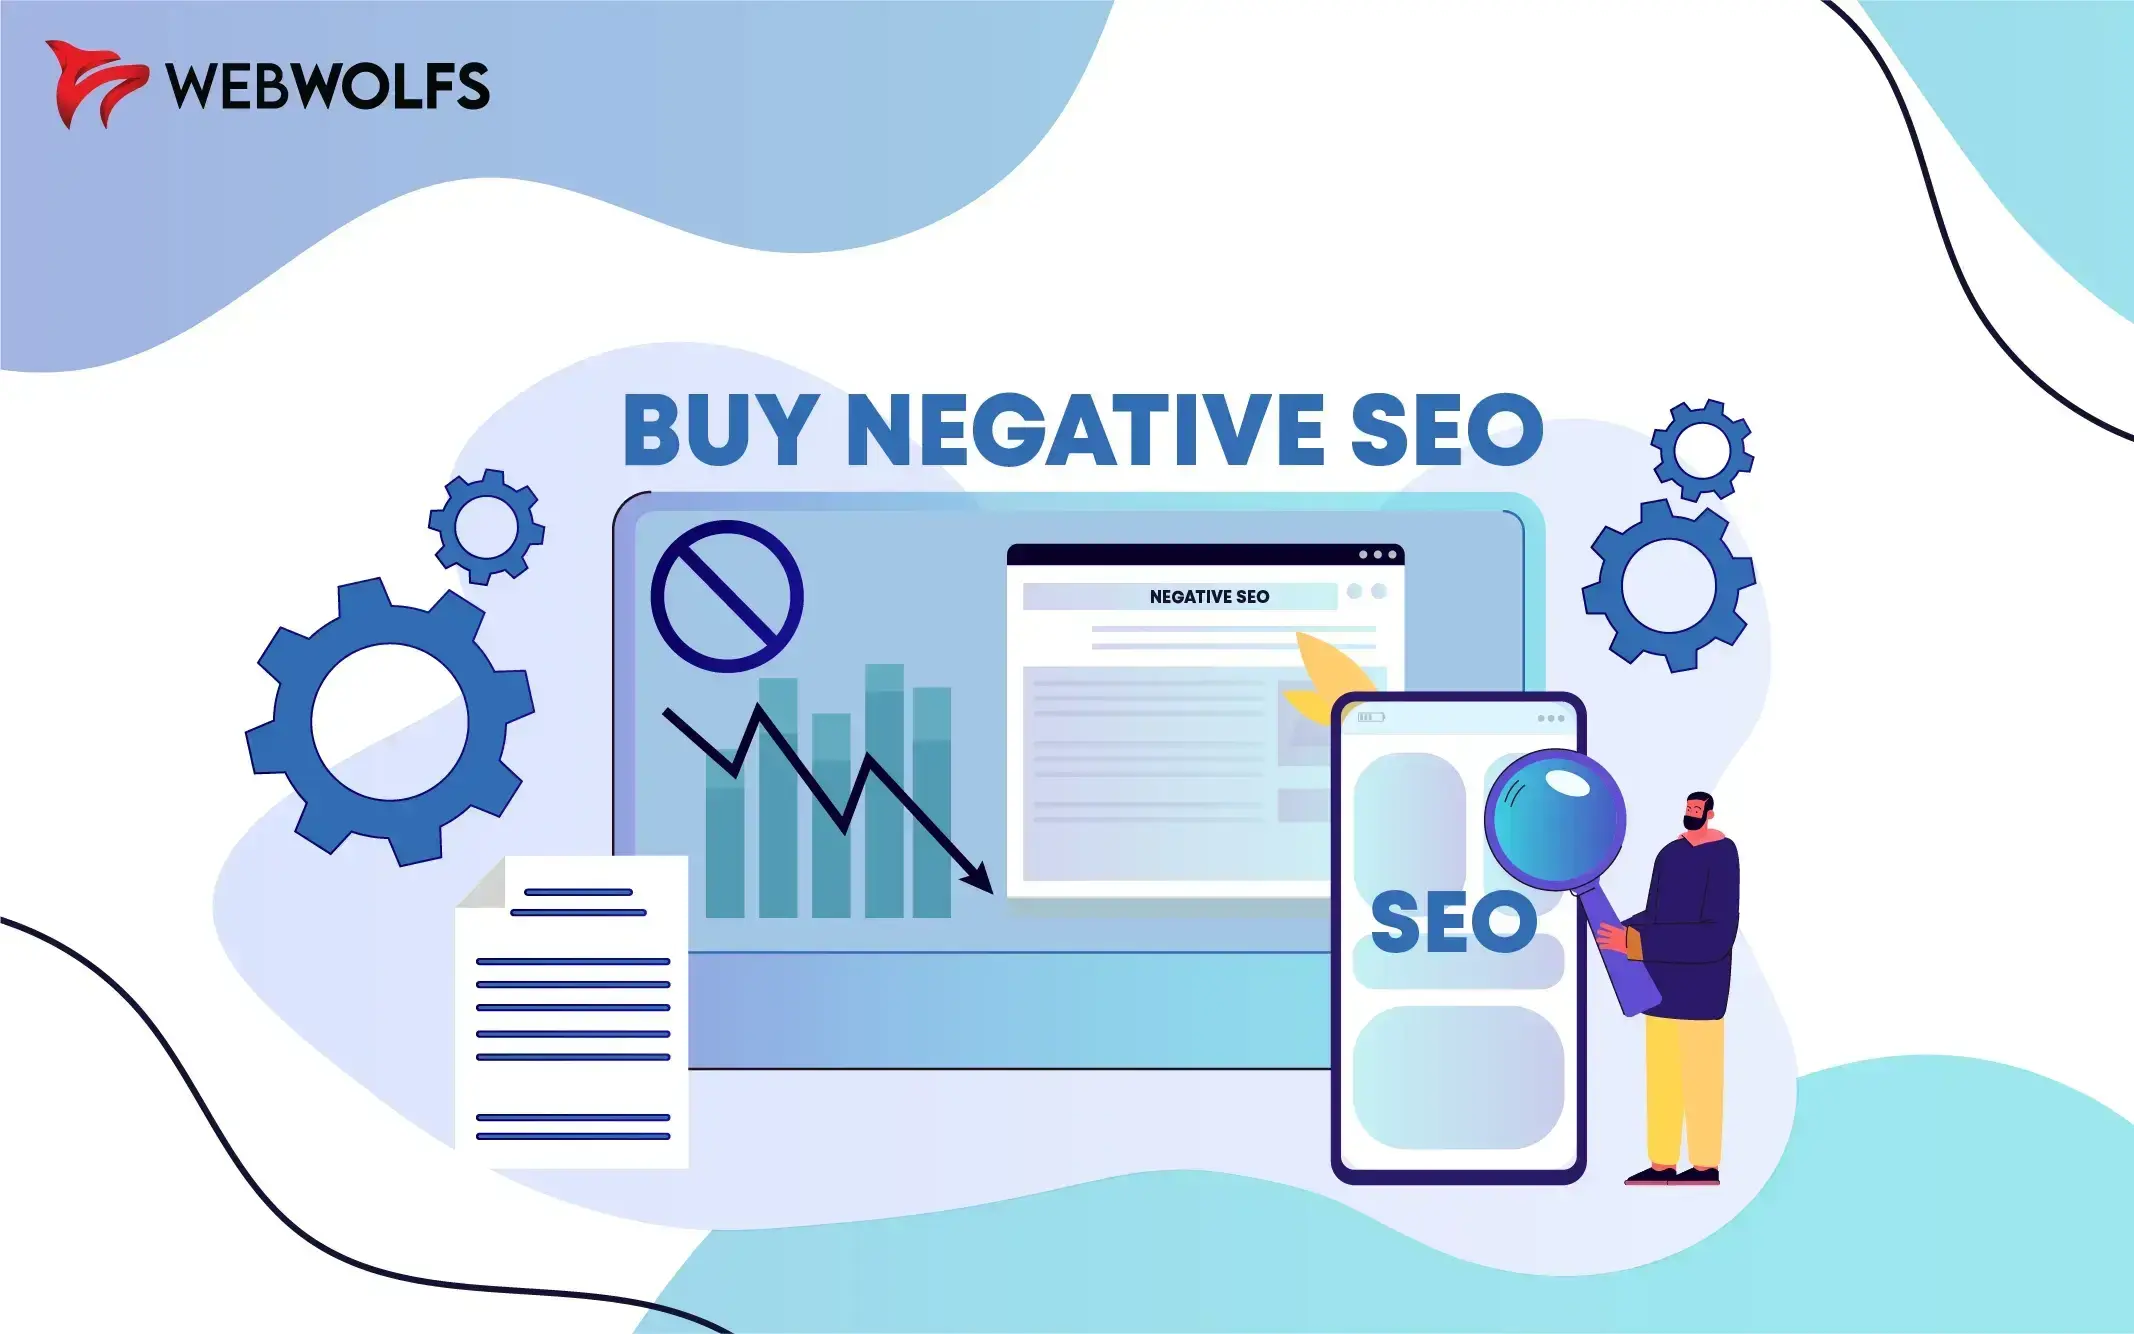 Why Should Businesses Buy Negative SEO